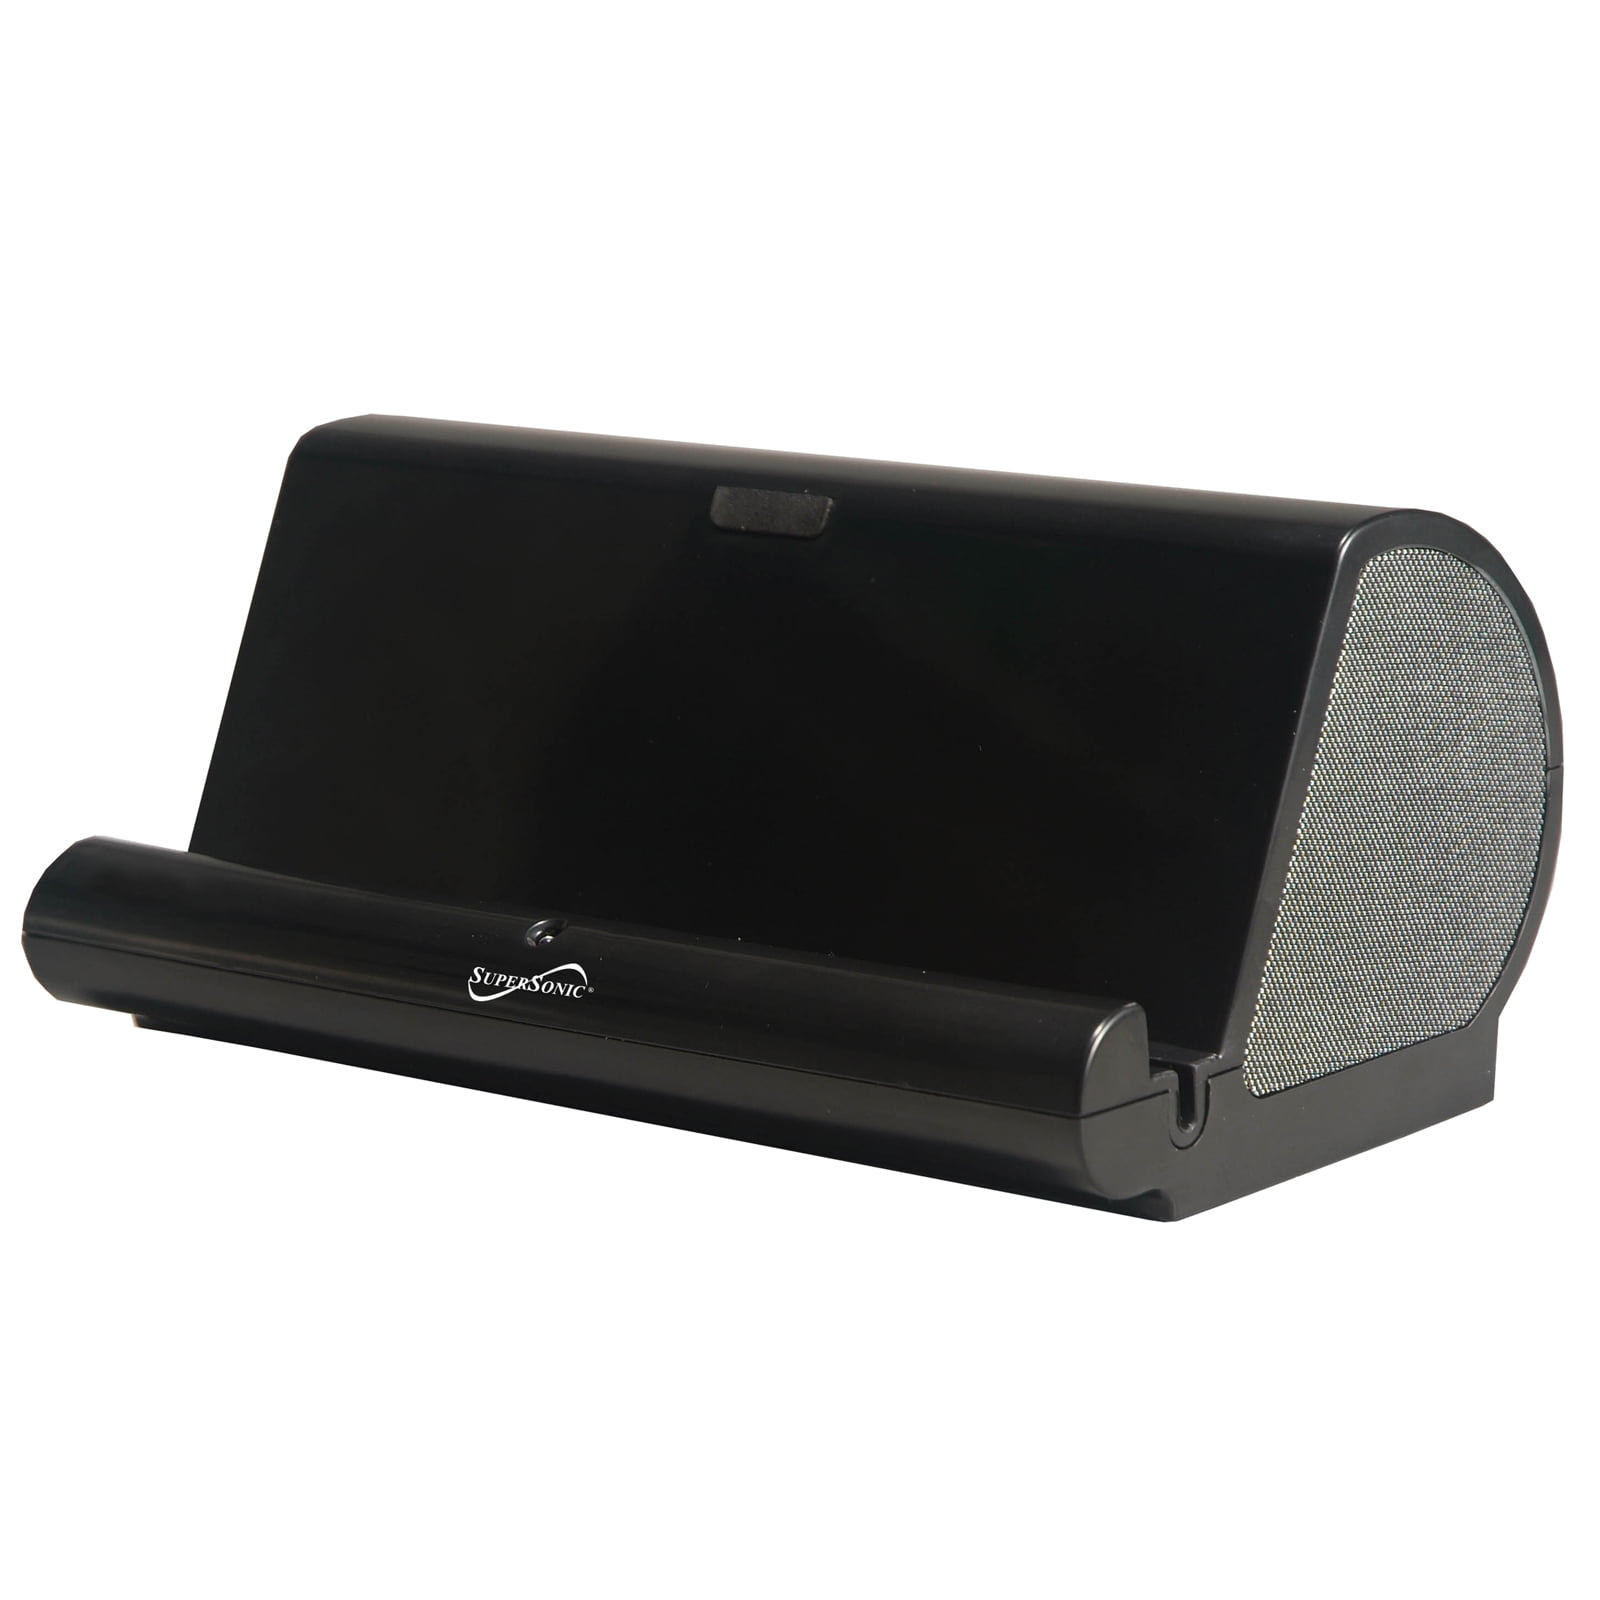 Supersonic Portable Speaker System/Stand with AUX Input - Walmart.com